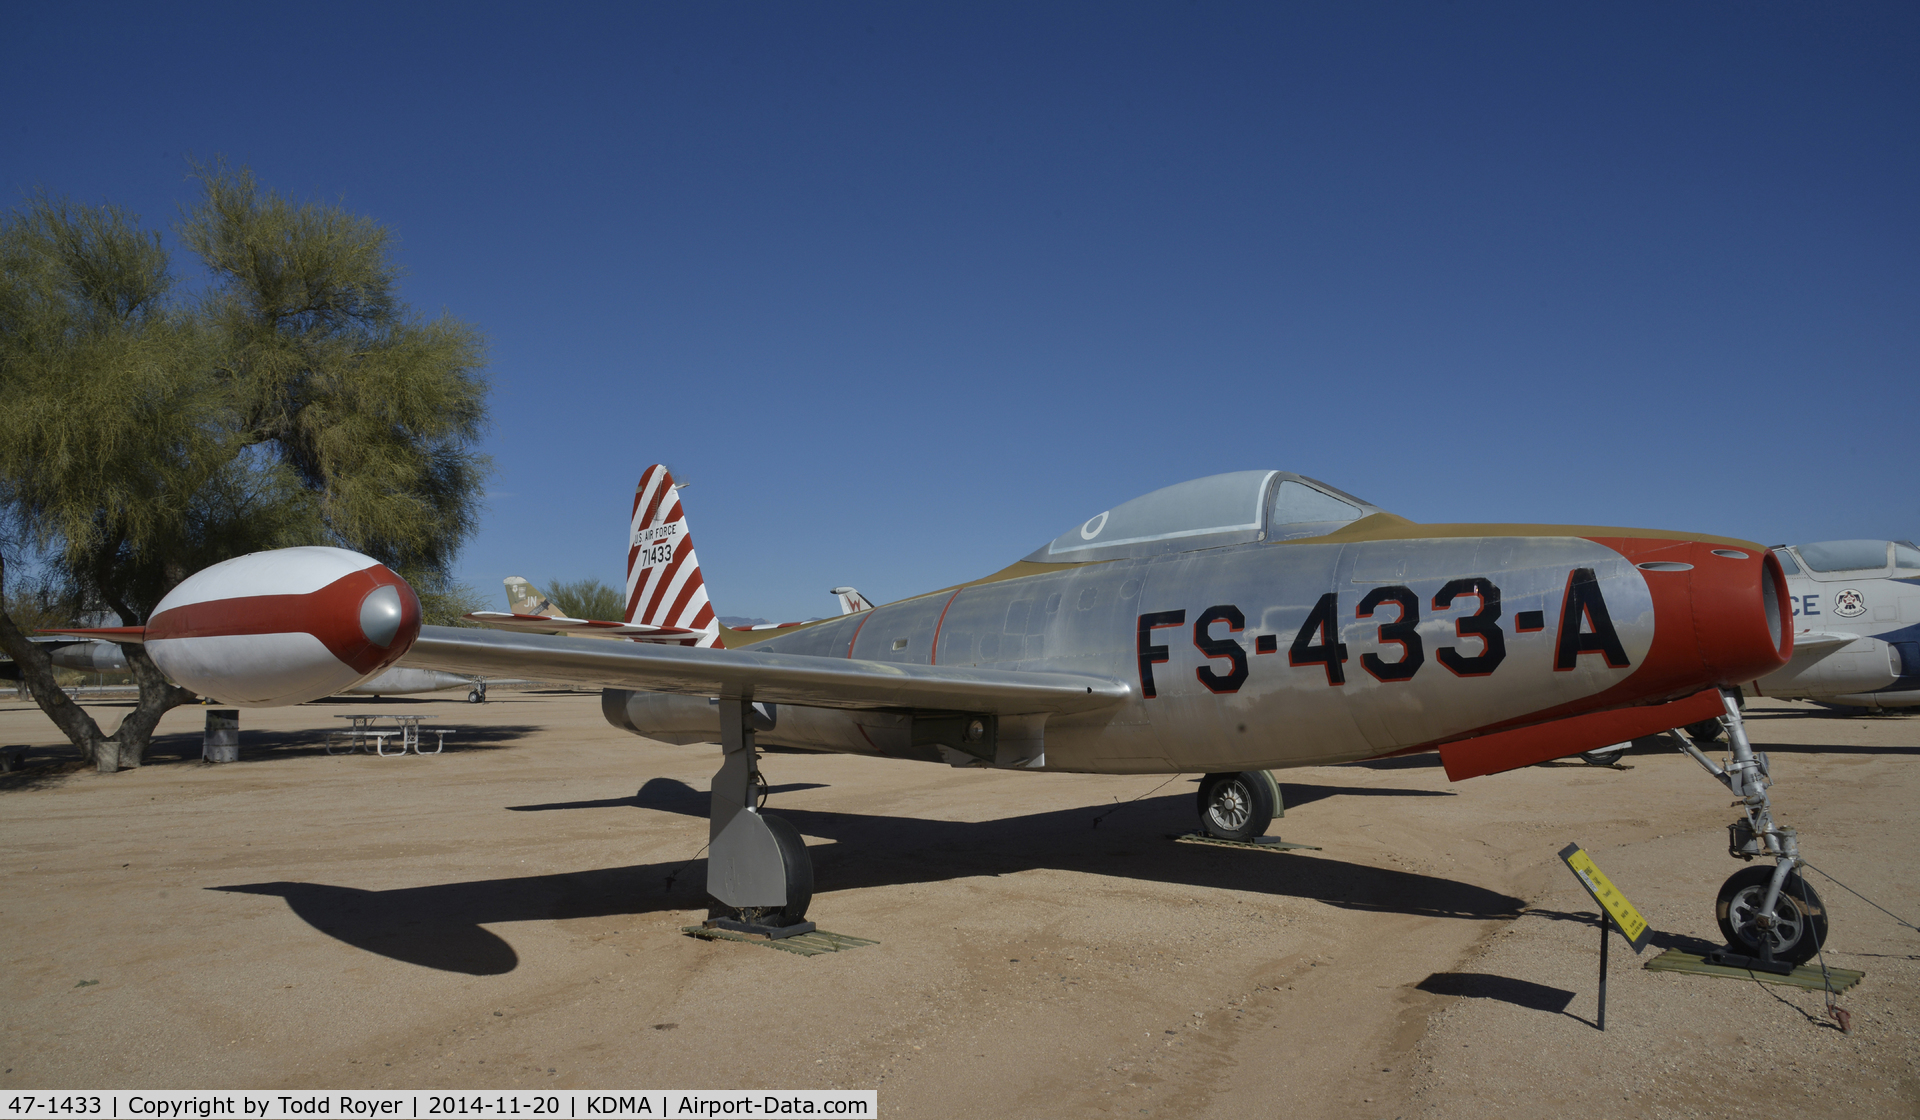 47-1433, 1947 Republic F-84C-2-RE Thunderjet C/N Not found 47-1433, On display at the Pima Air and Space Museum